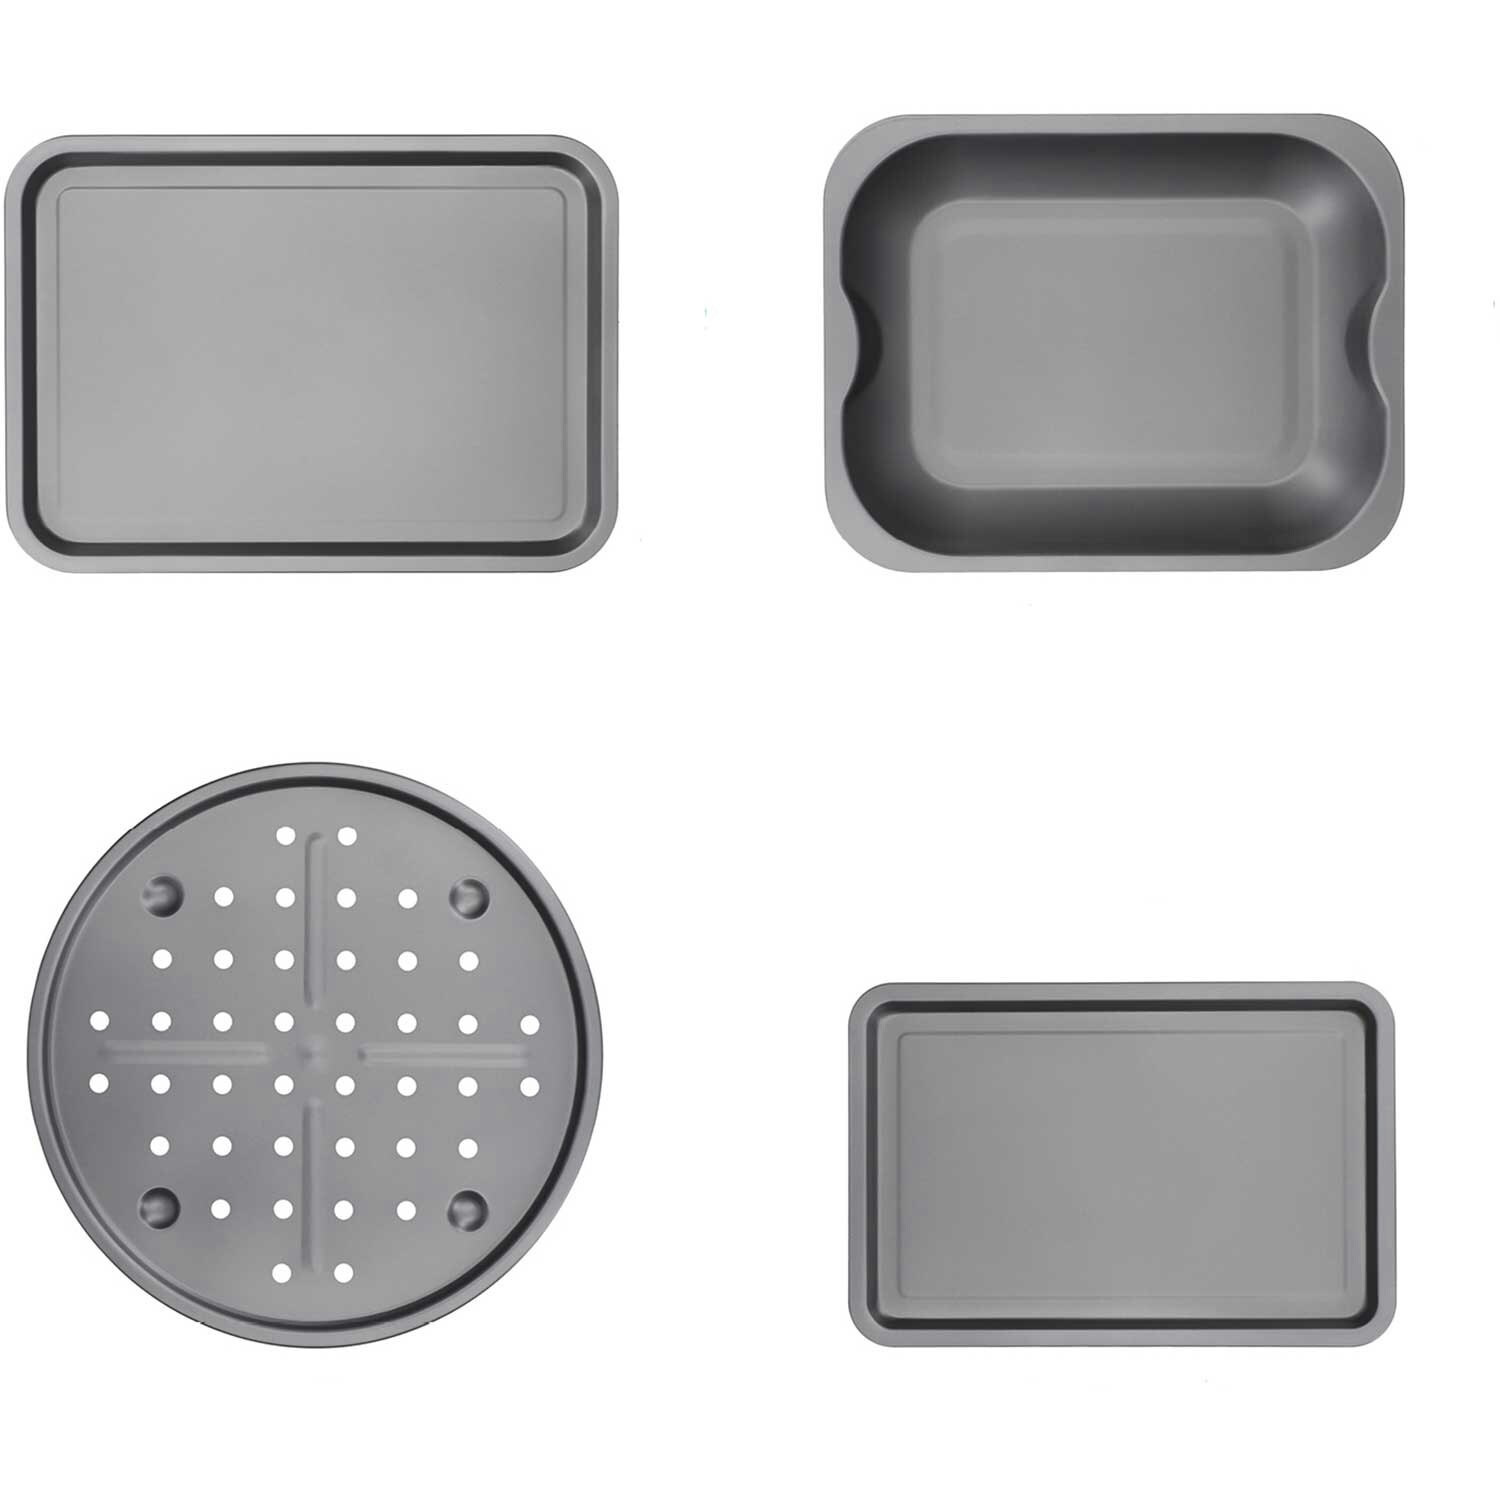 Oven Crisp Baking Tray With Grid - Nordic Ware @ RoyalDesign